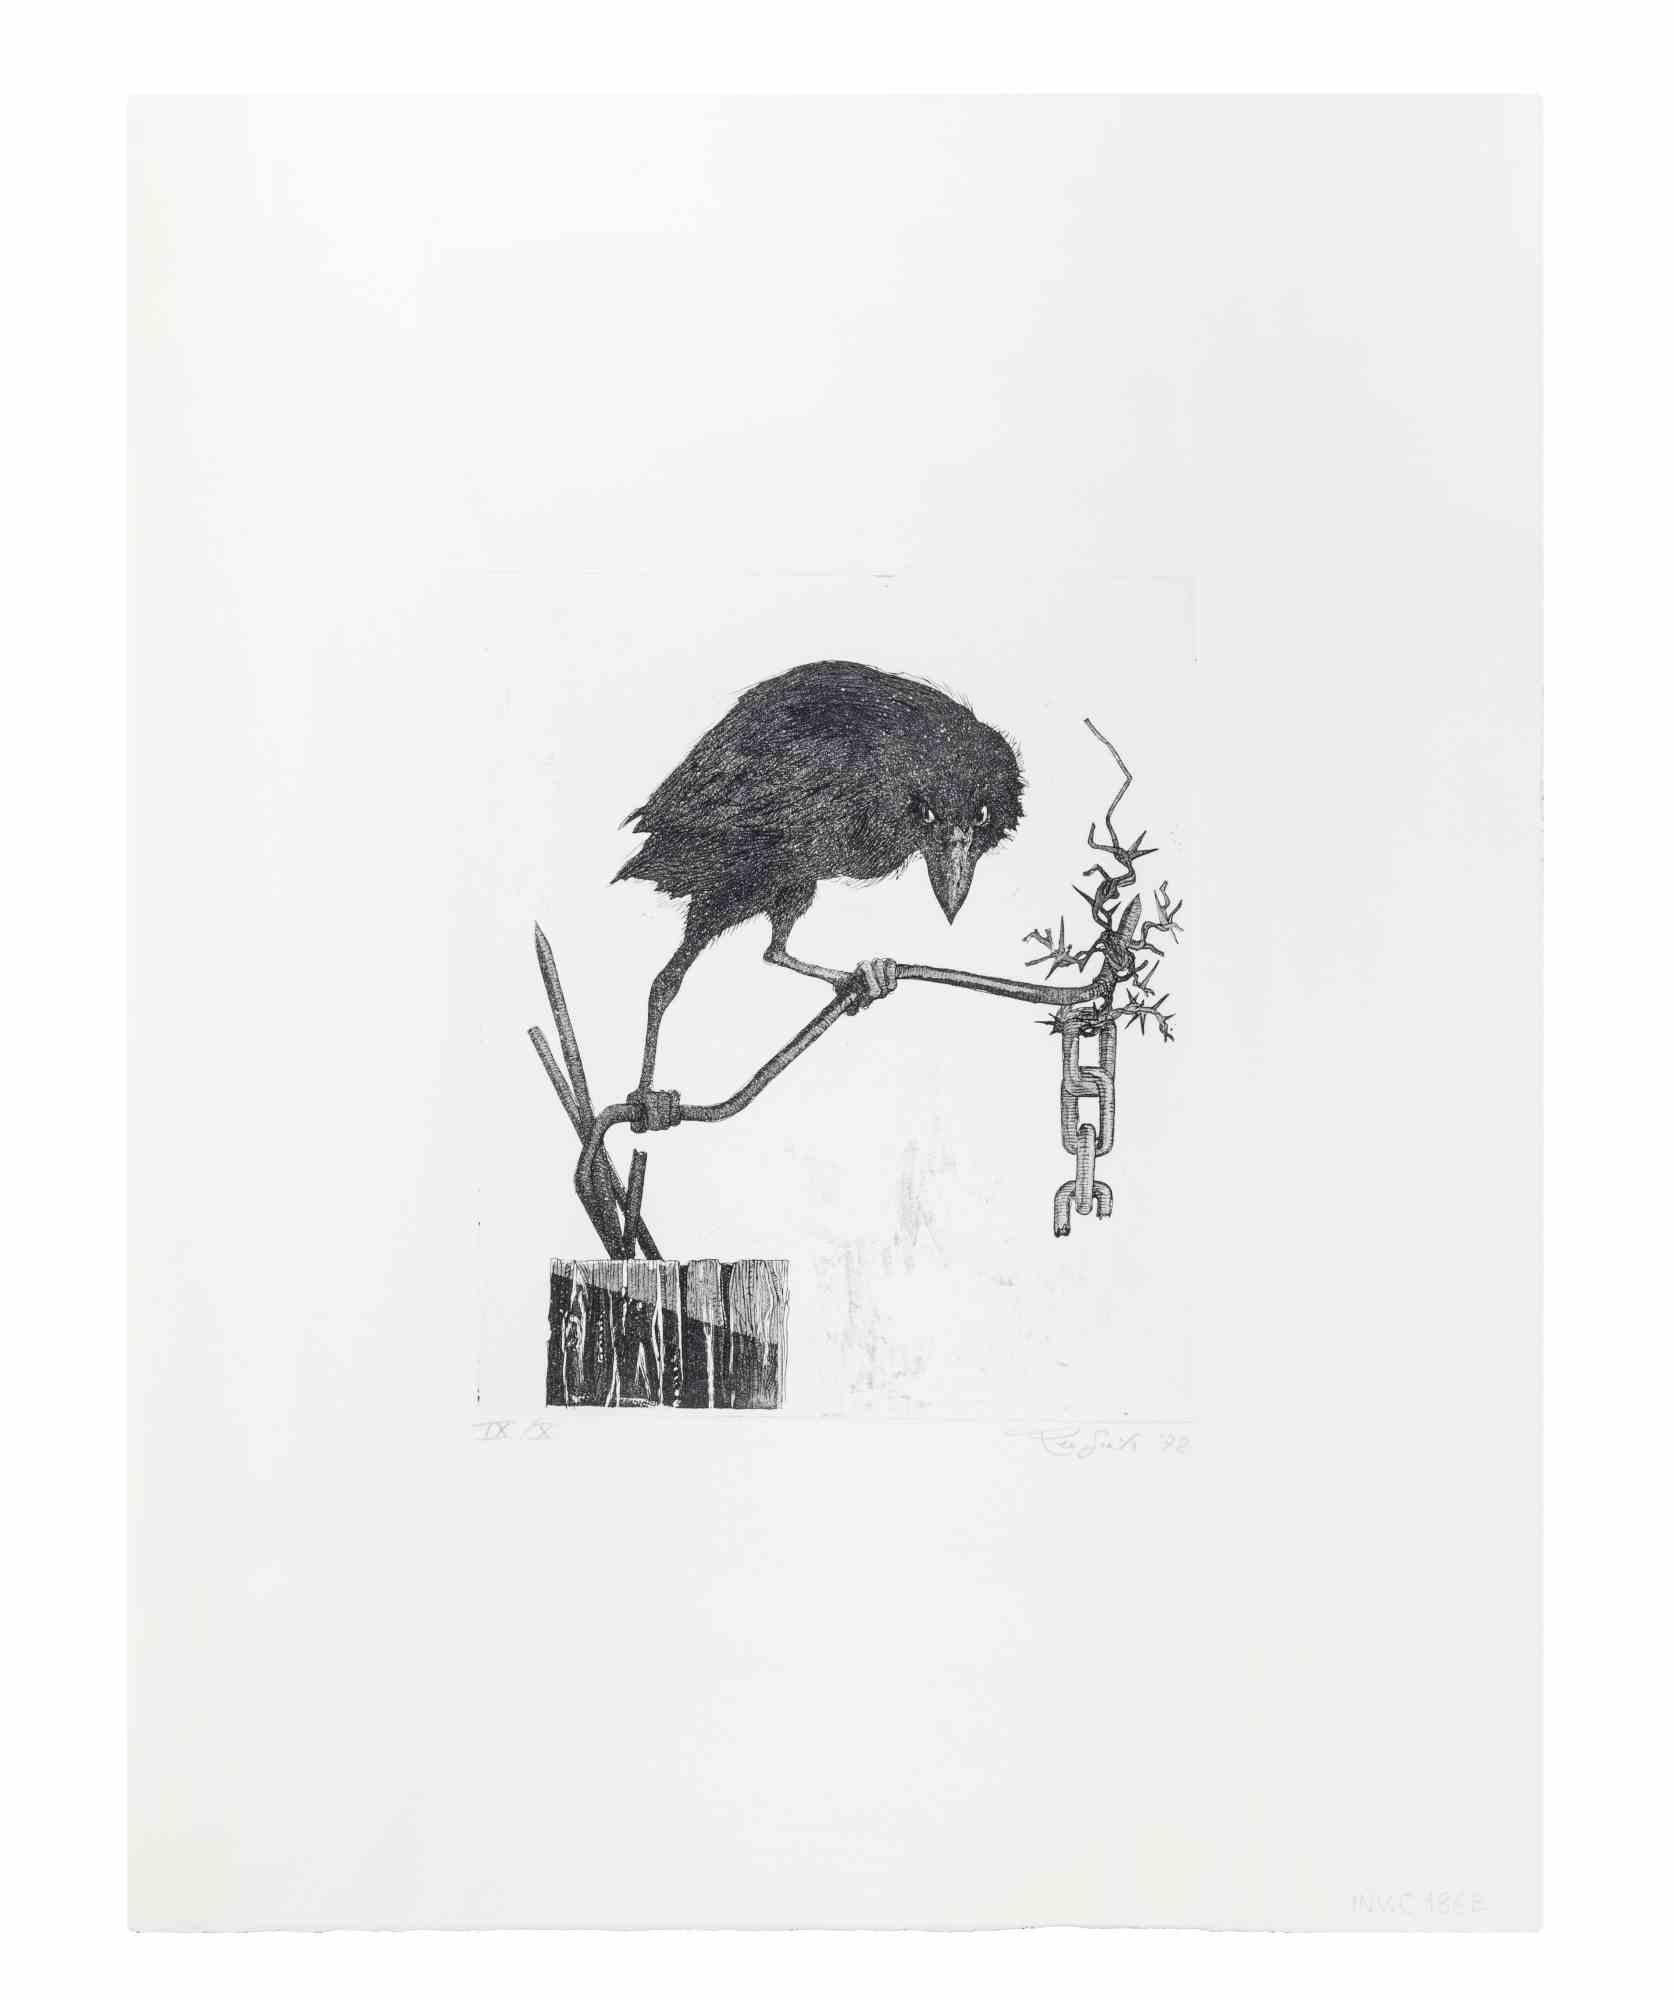 Crow on the Branch - Etching by Leo Guida - 1972